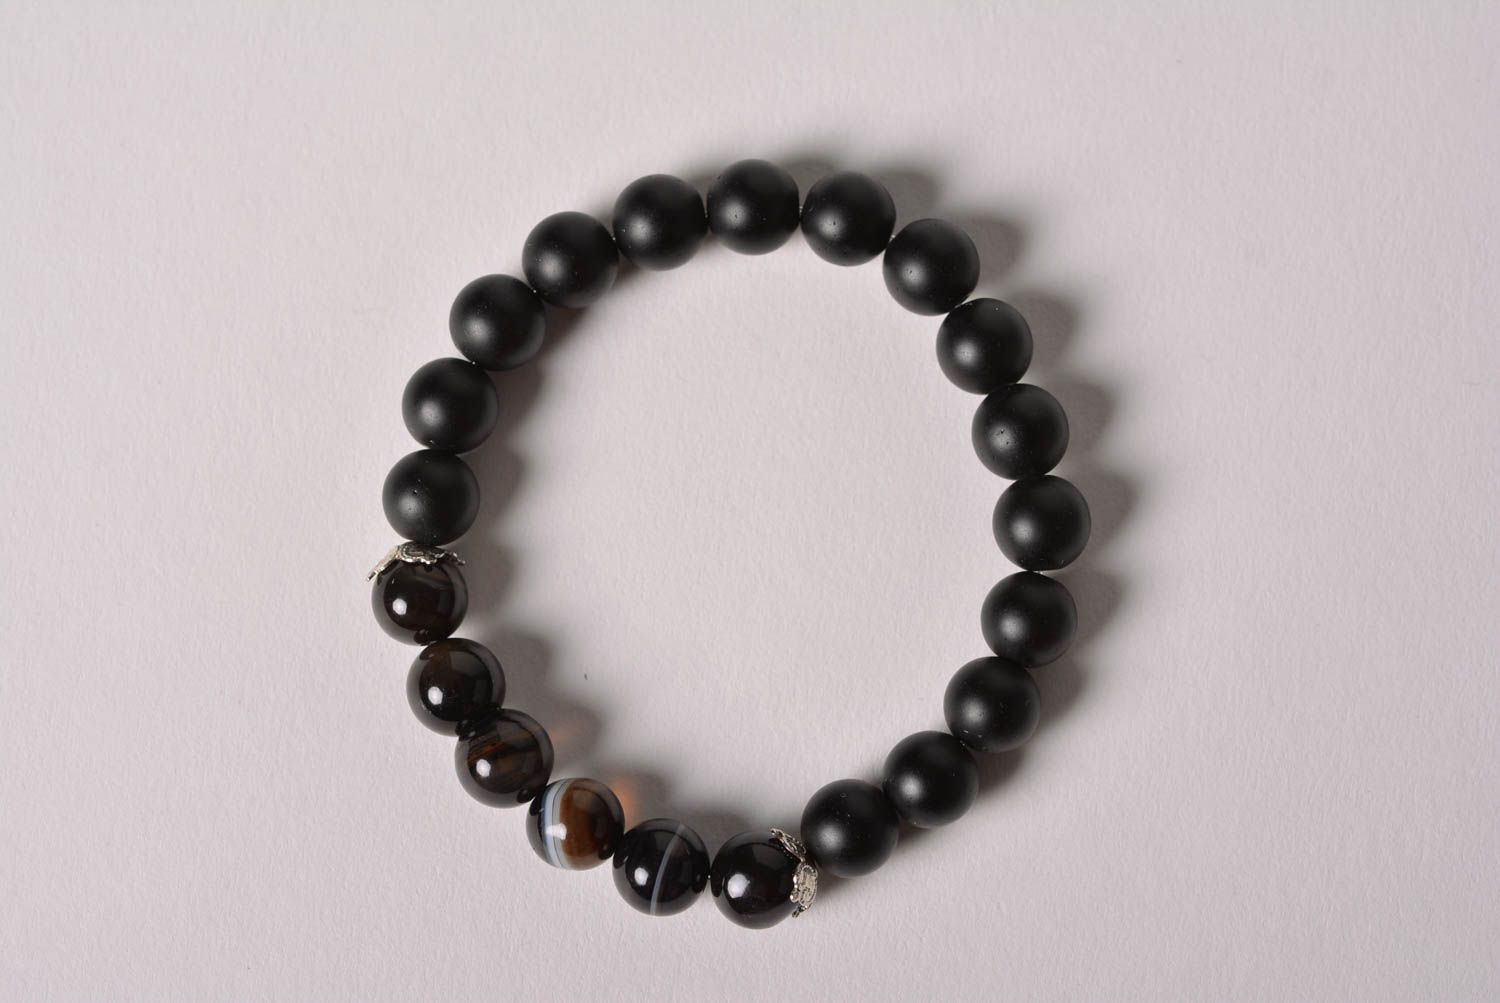 Handmade laconic wrist bracelet with natural black agate stone beads for women photo 3